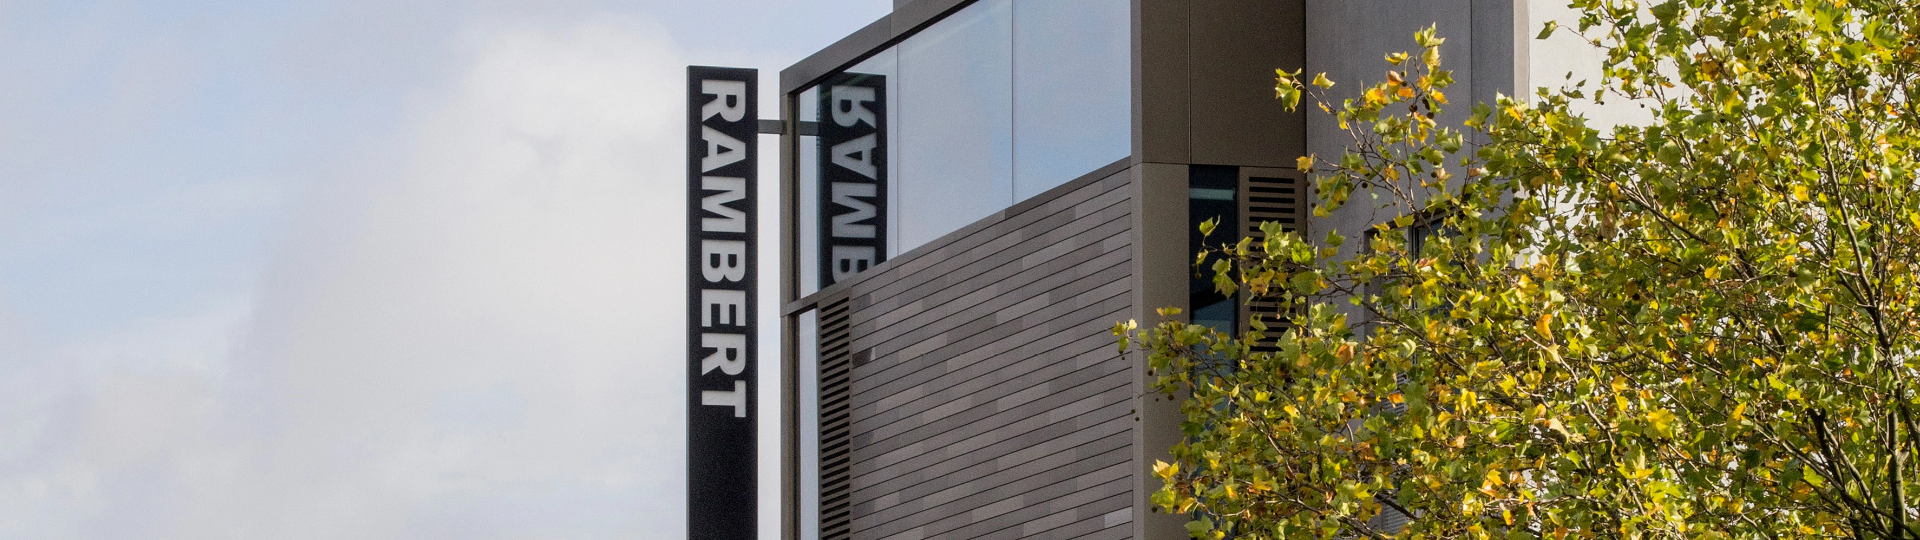 Modern building with reflective glass and "RAMBERT" signage. Gray and wooden exterior with a tree on the right side. Sky in the background.